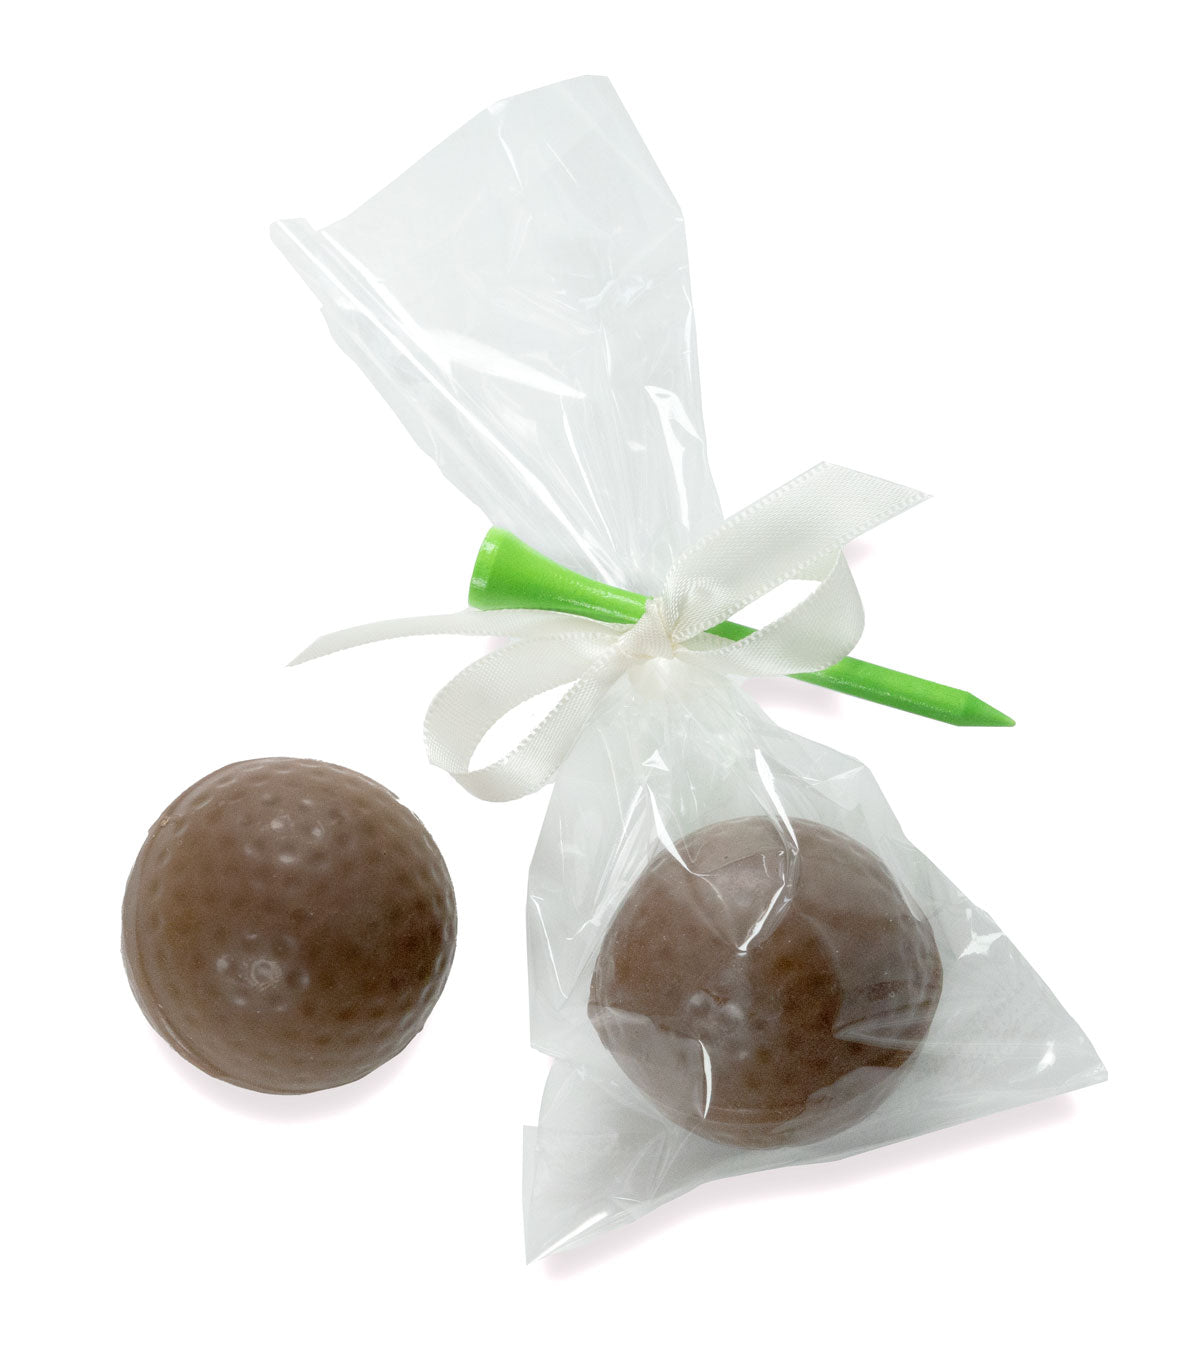 Chocolate golf ball packaged with a golf tee